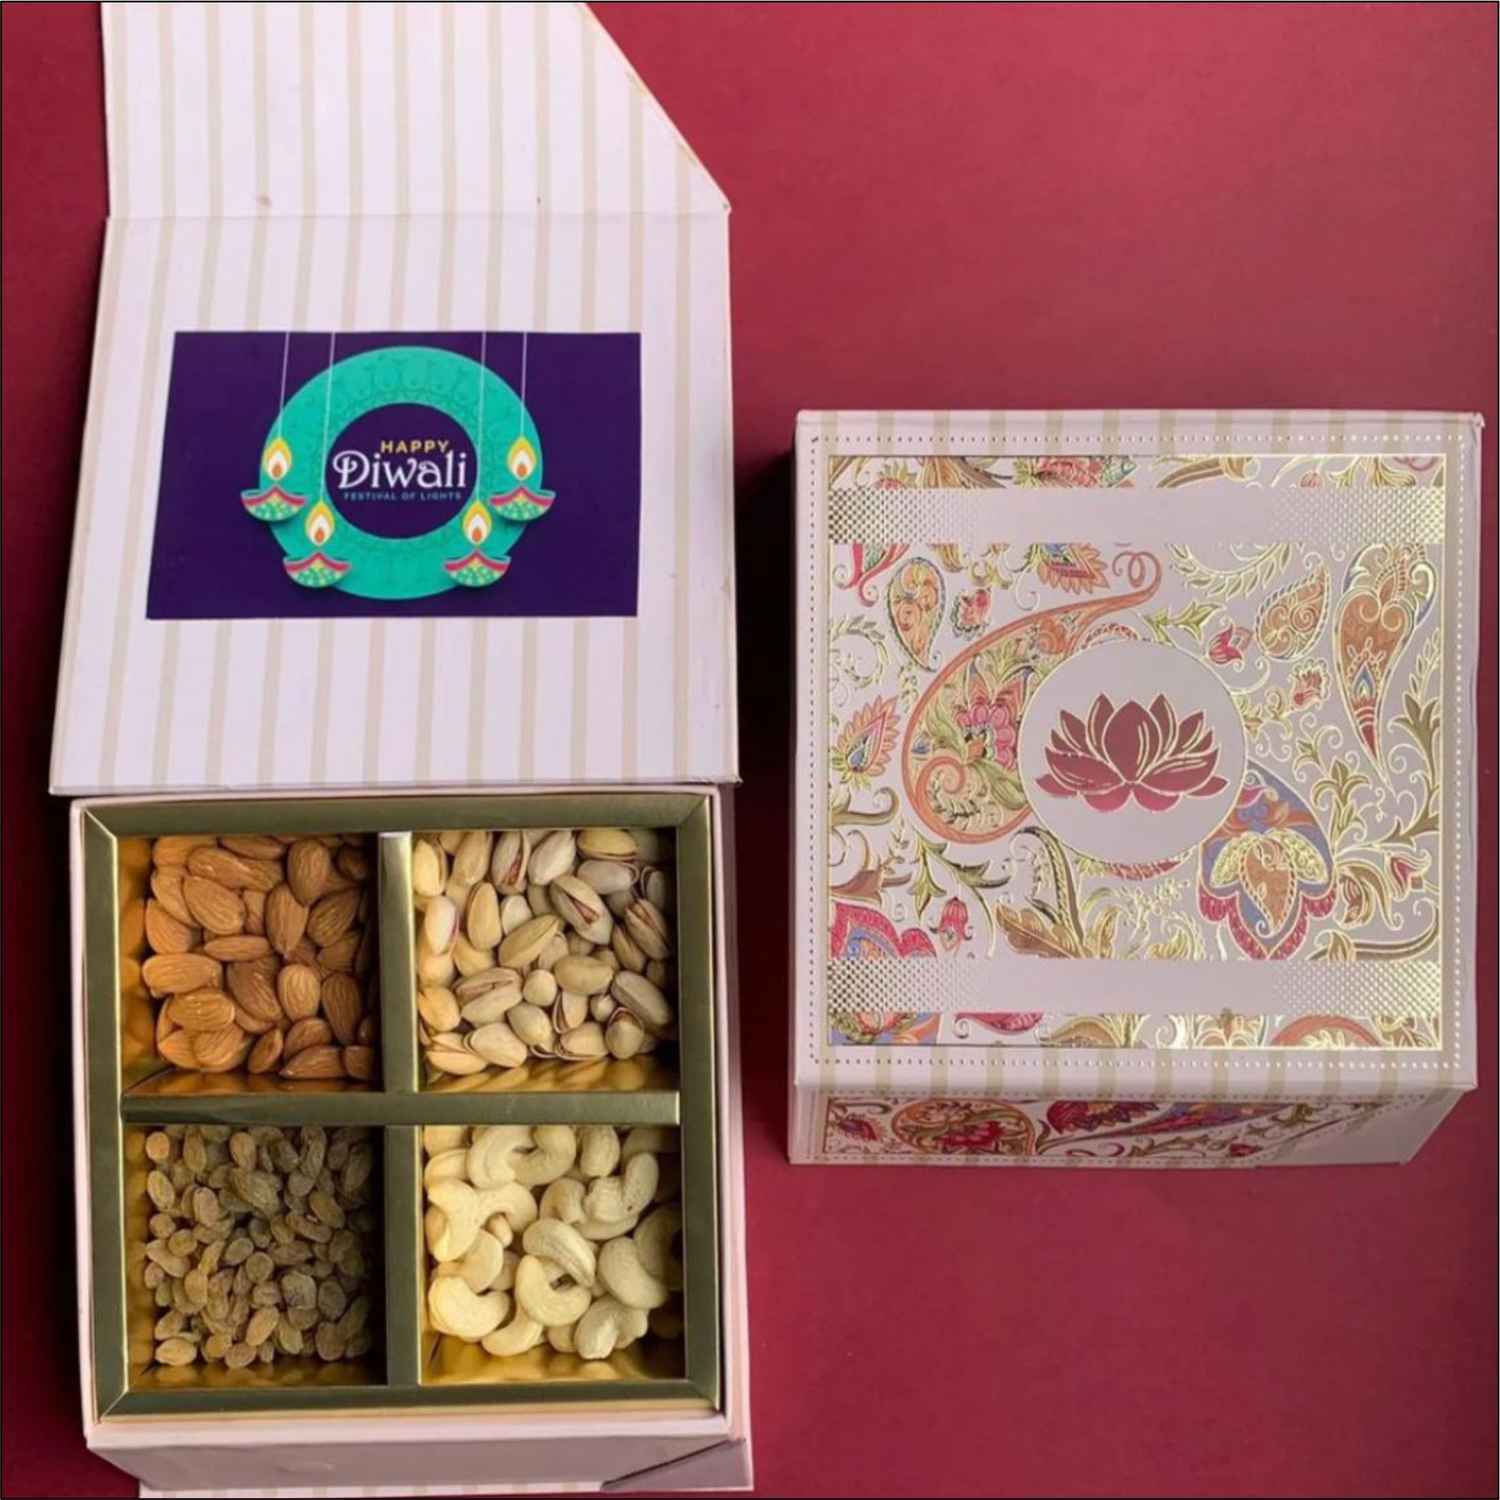 Send Exclusive Diwali Gifts Hamper of Goodies to India